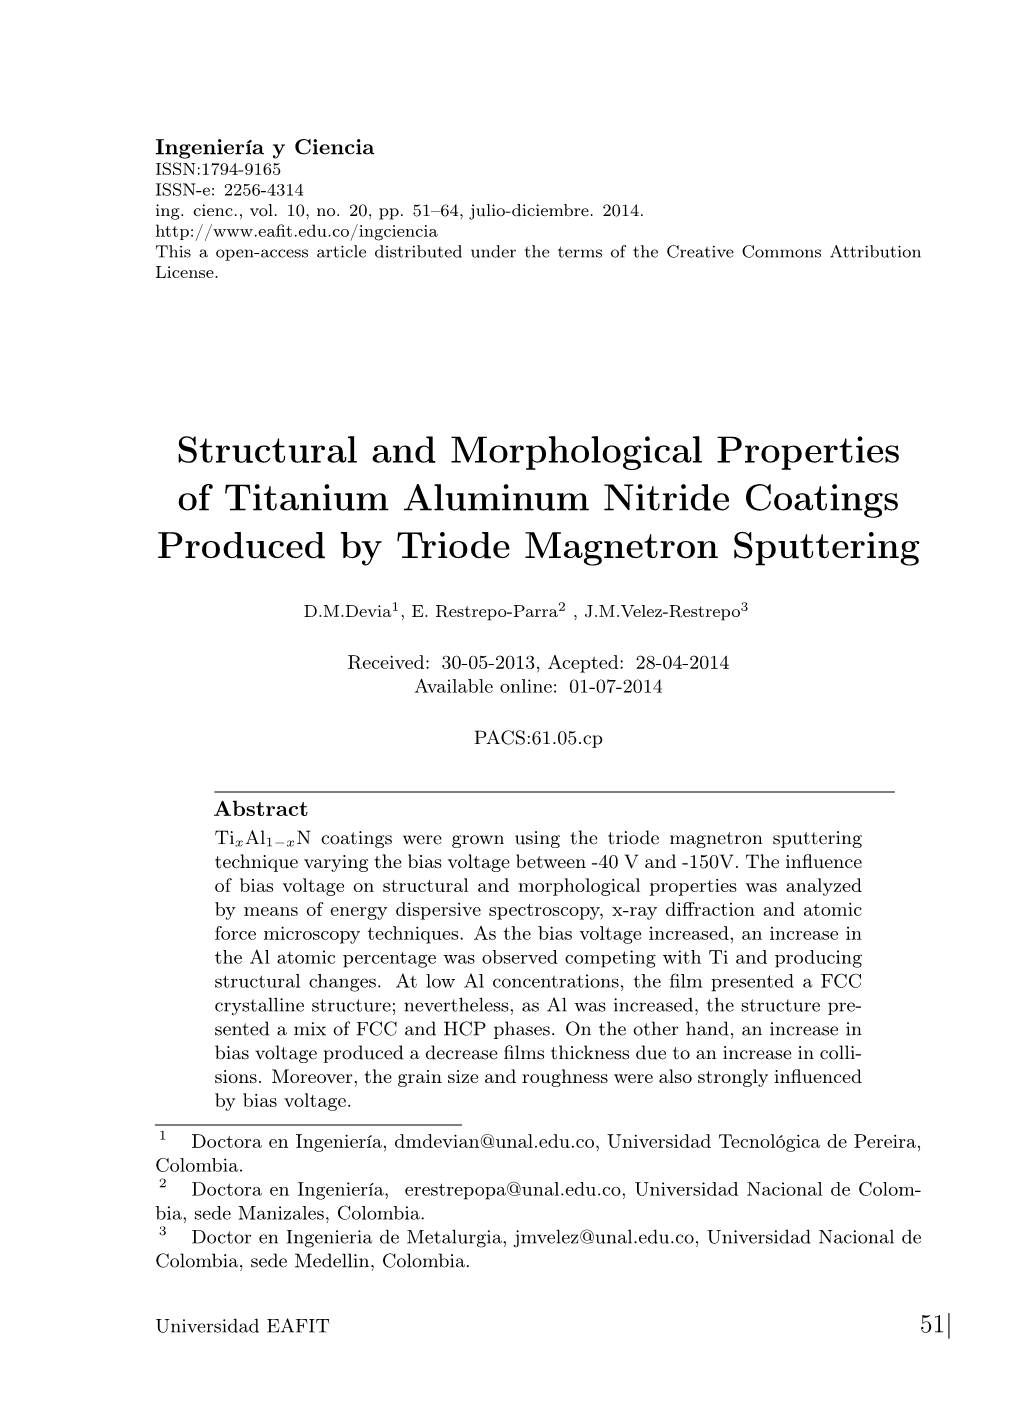 Structural and Morphological Properties of Titanium Aluminum Nitride Coatings Produced by Triode Magnetron Sputtering